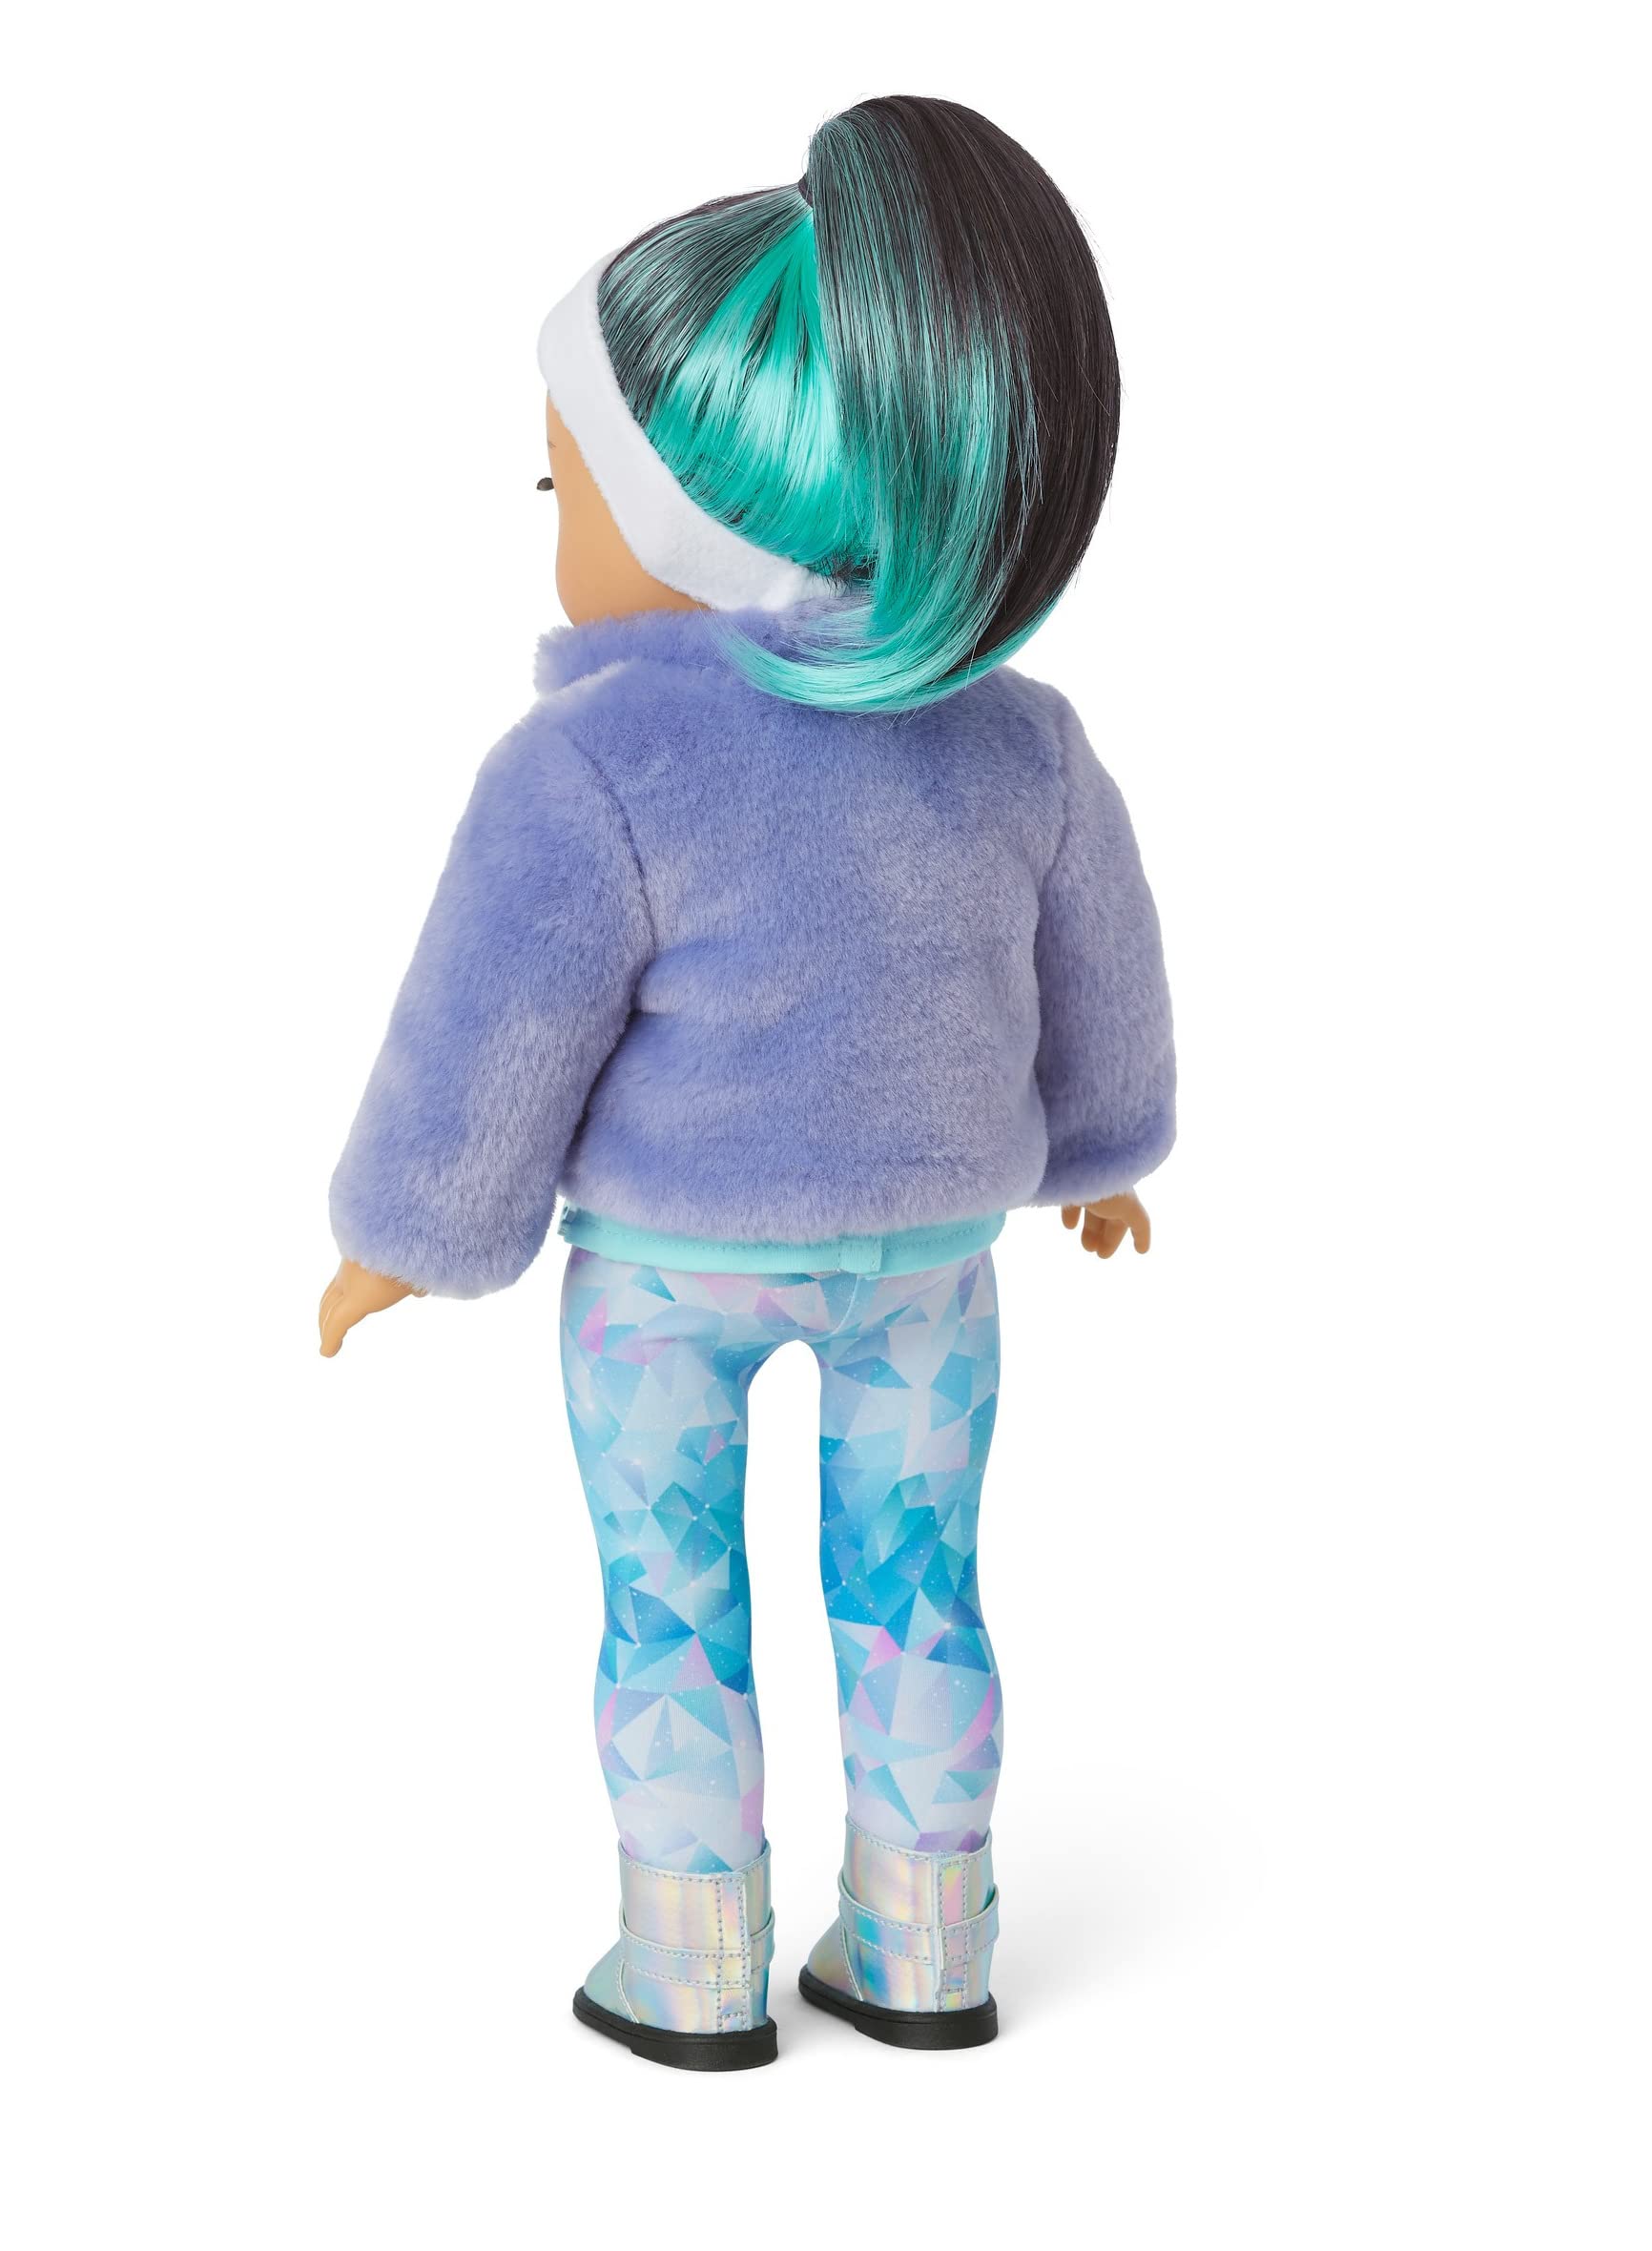 American Girl 2022 Girl of The Year Corinne’s Casual Outfit for 18-inch Dolls with a Purple Coat, and a Pale Blue Short-Sleeved tee, a Pair of Multicolored Print Leggings, White Fleece Headband